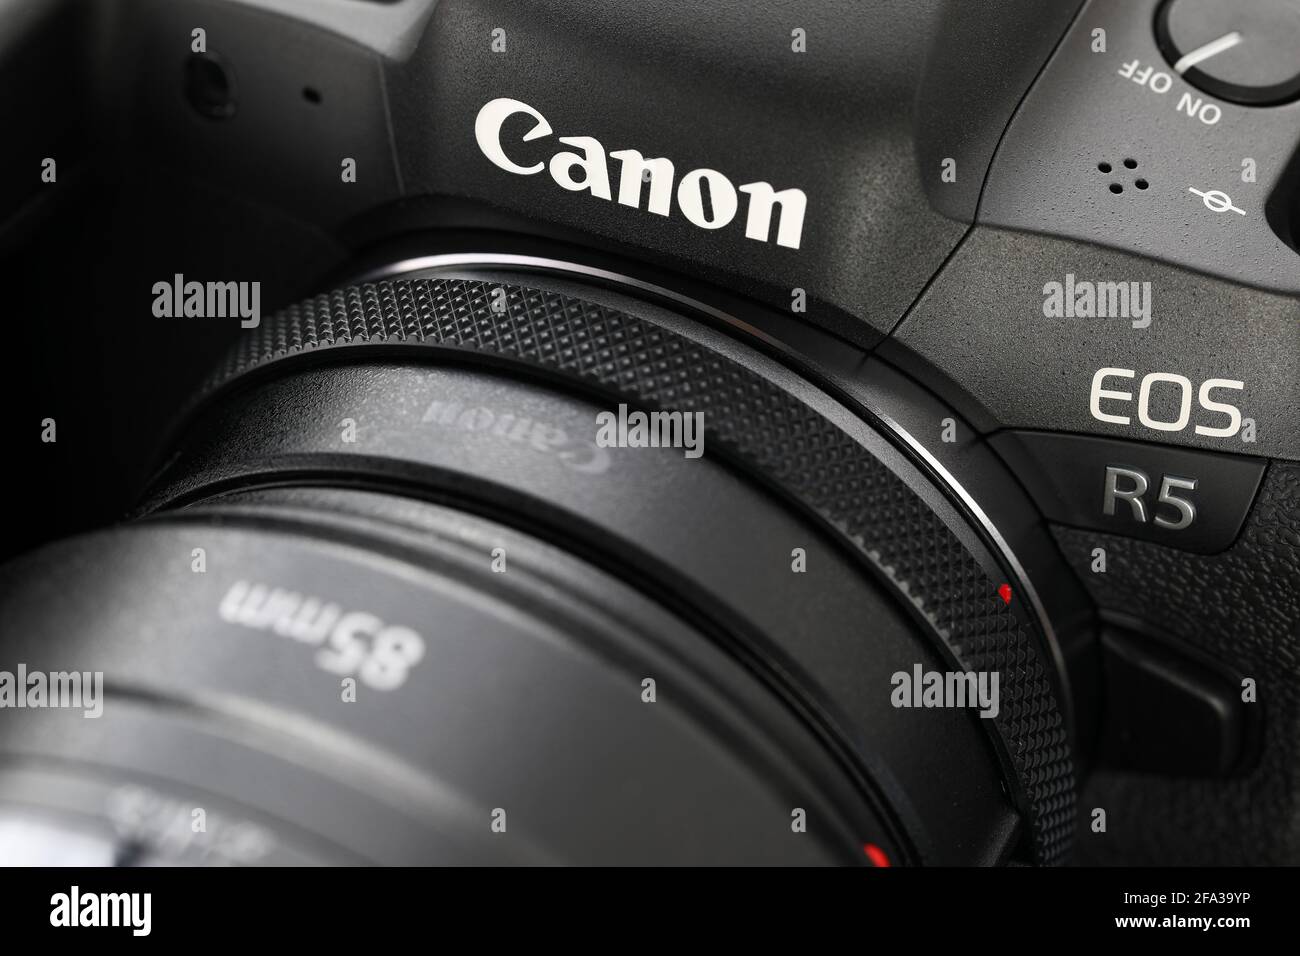 Page 3 - Canon Camera High Resolution Stock Photography and Images - Alamy